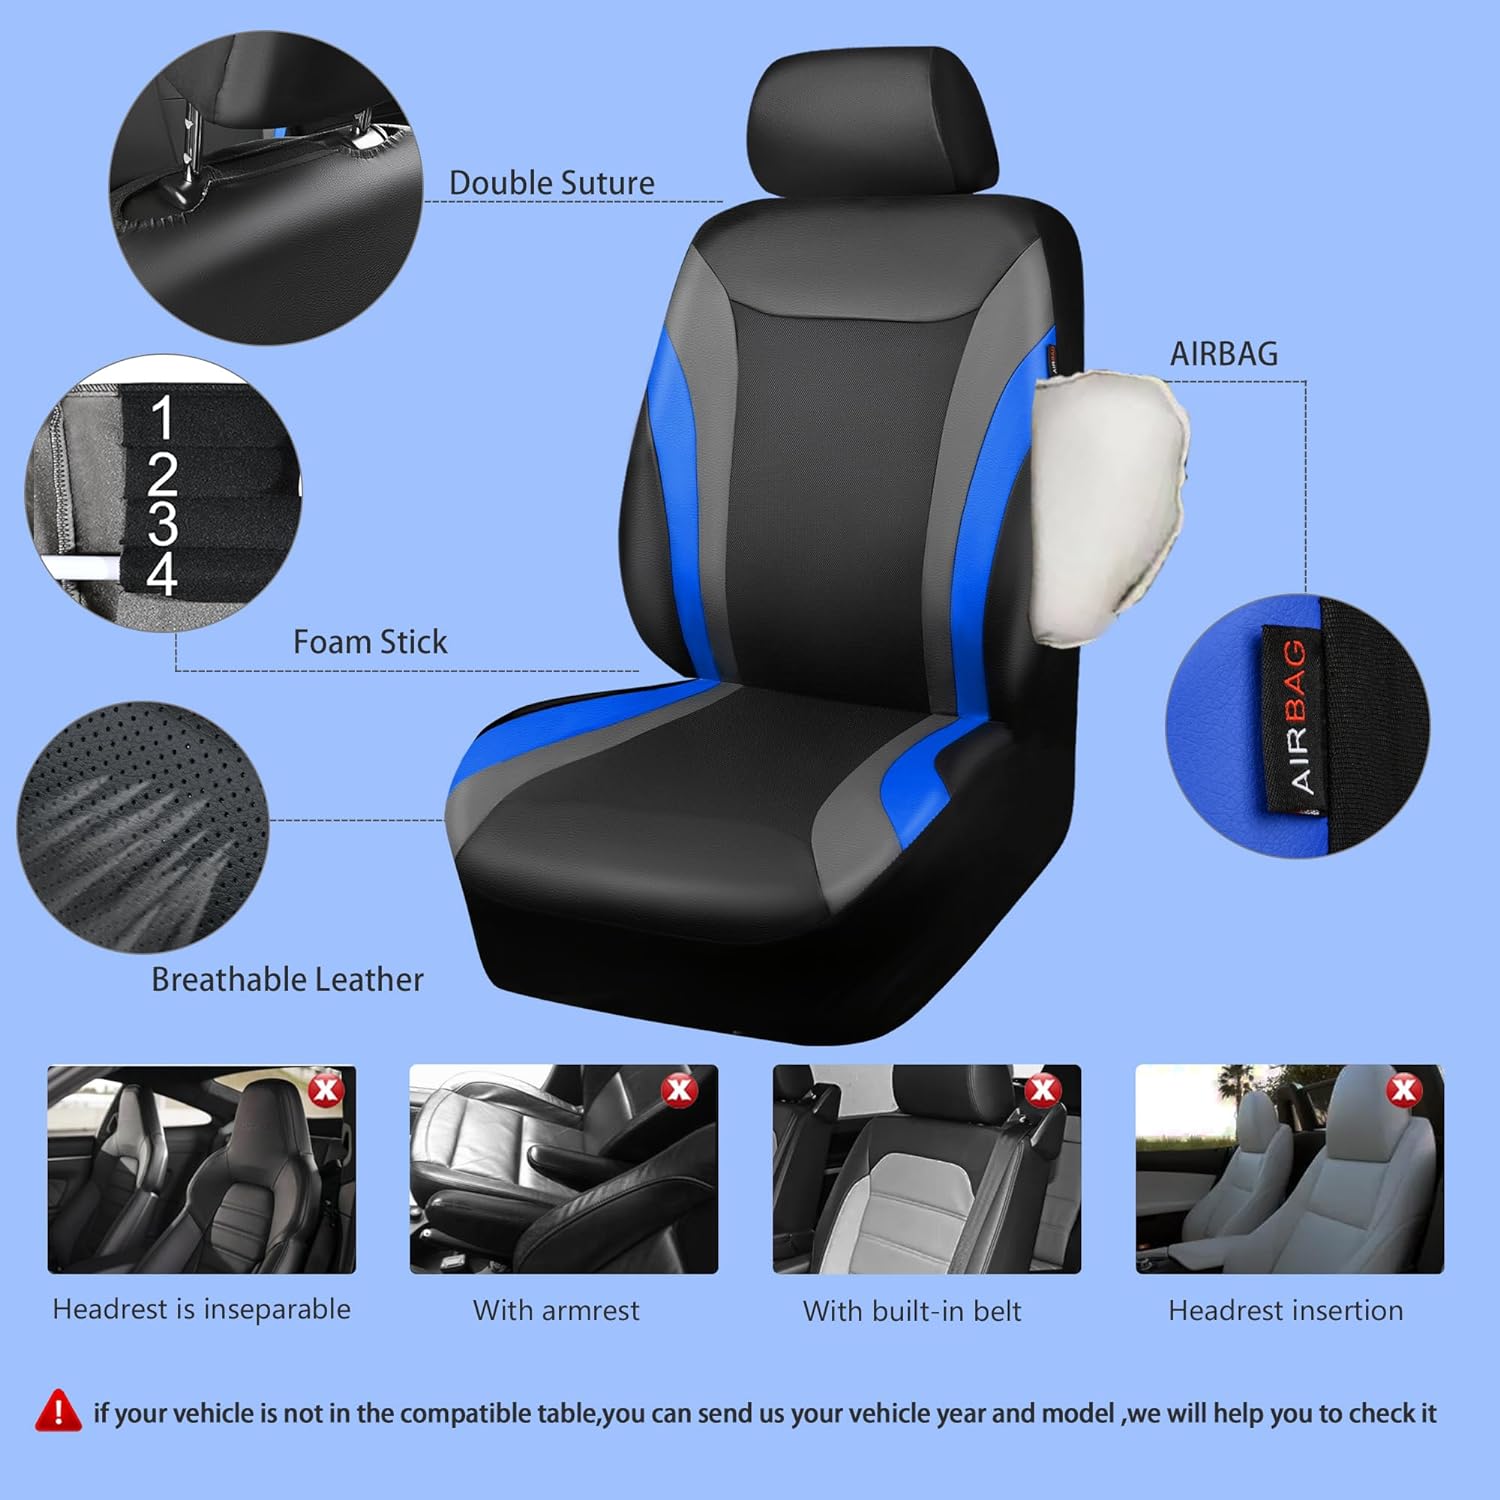 CAR PASS Leather Car Seat Covers Full Set,Waterproof Automotive Seat Covers for Cars SUV Sedan Truck,Airbag Compatible,5mm Composite Sponge,Sporty Universal Fit for Cute Women Girl